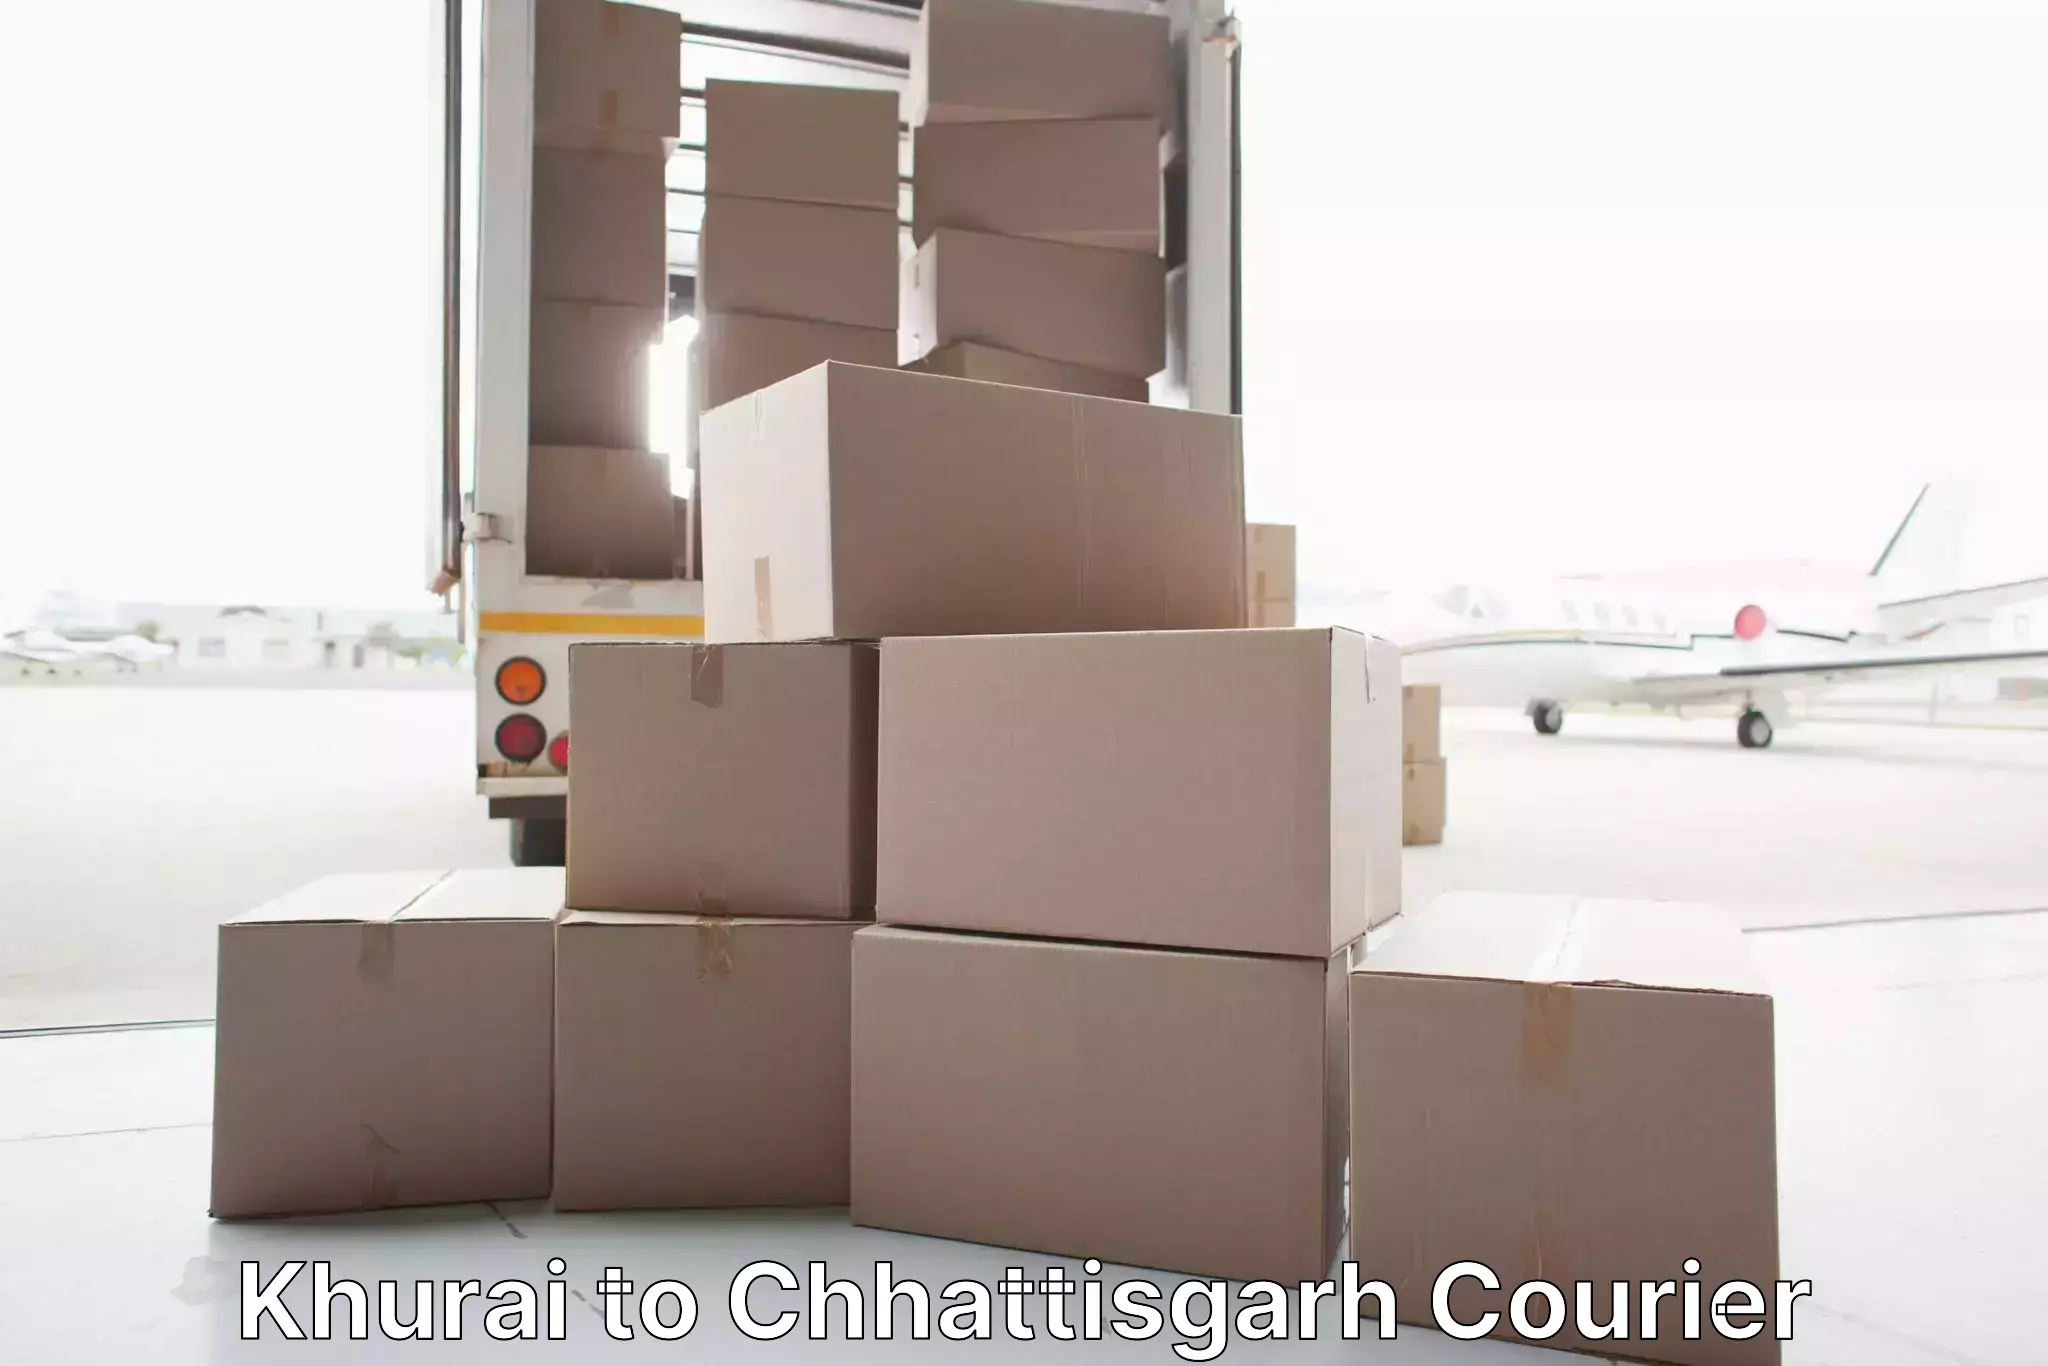 Trusted moving company in Khurai to bagbahra